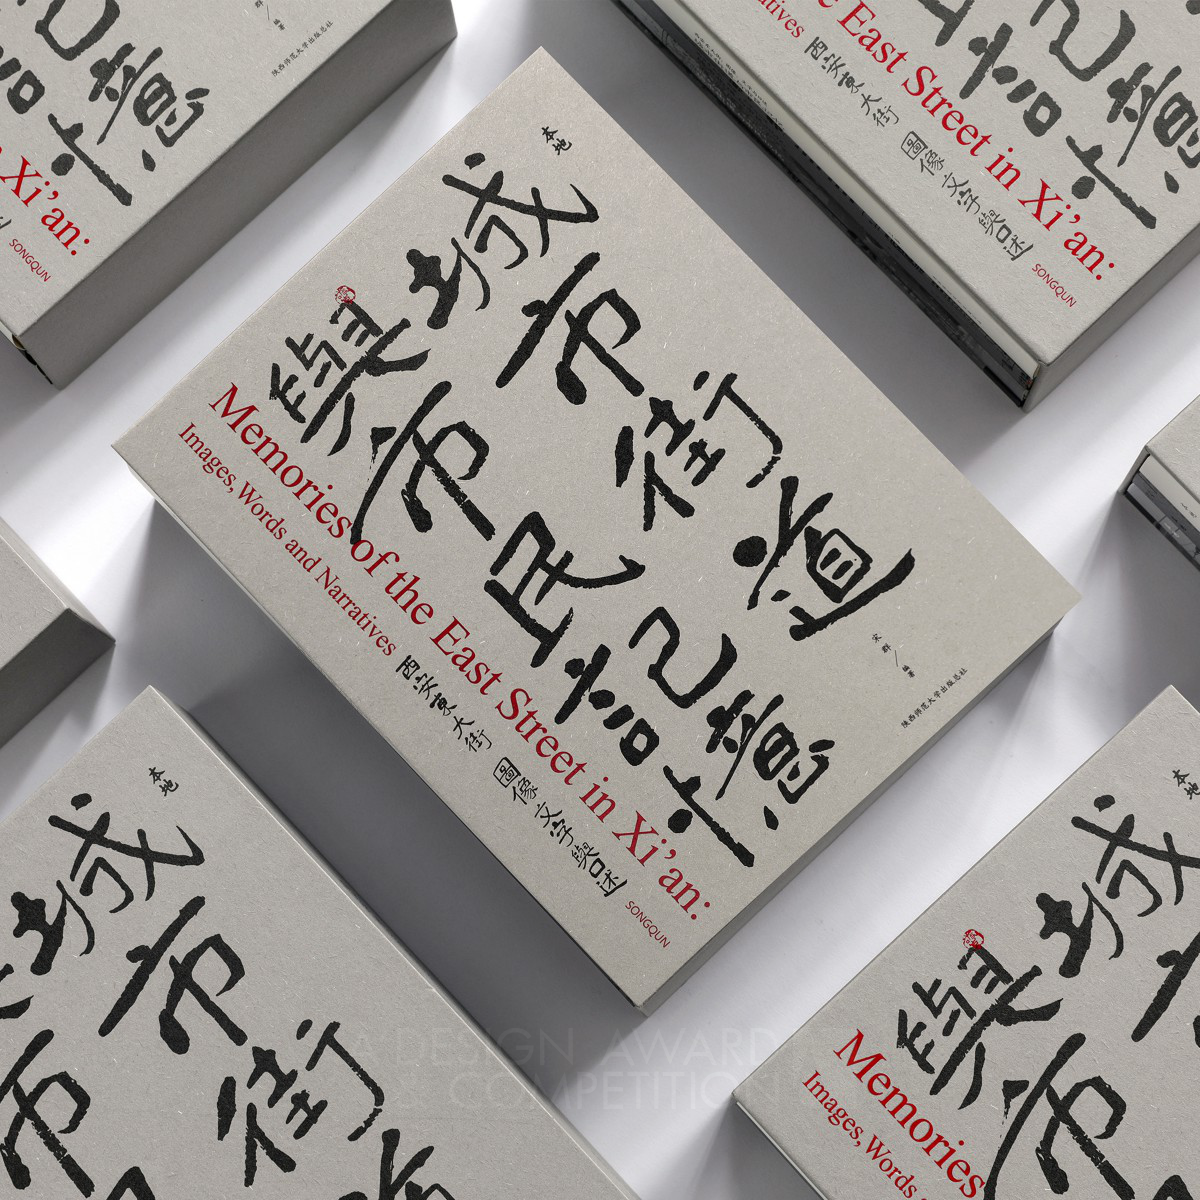 Qun Song wins Silver at the prestigious A' Print and Published Media Design Award with Memories of the East Street in Xi'an Book.